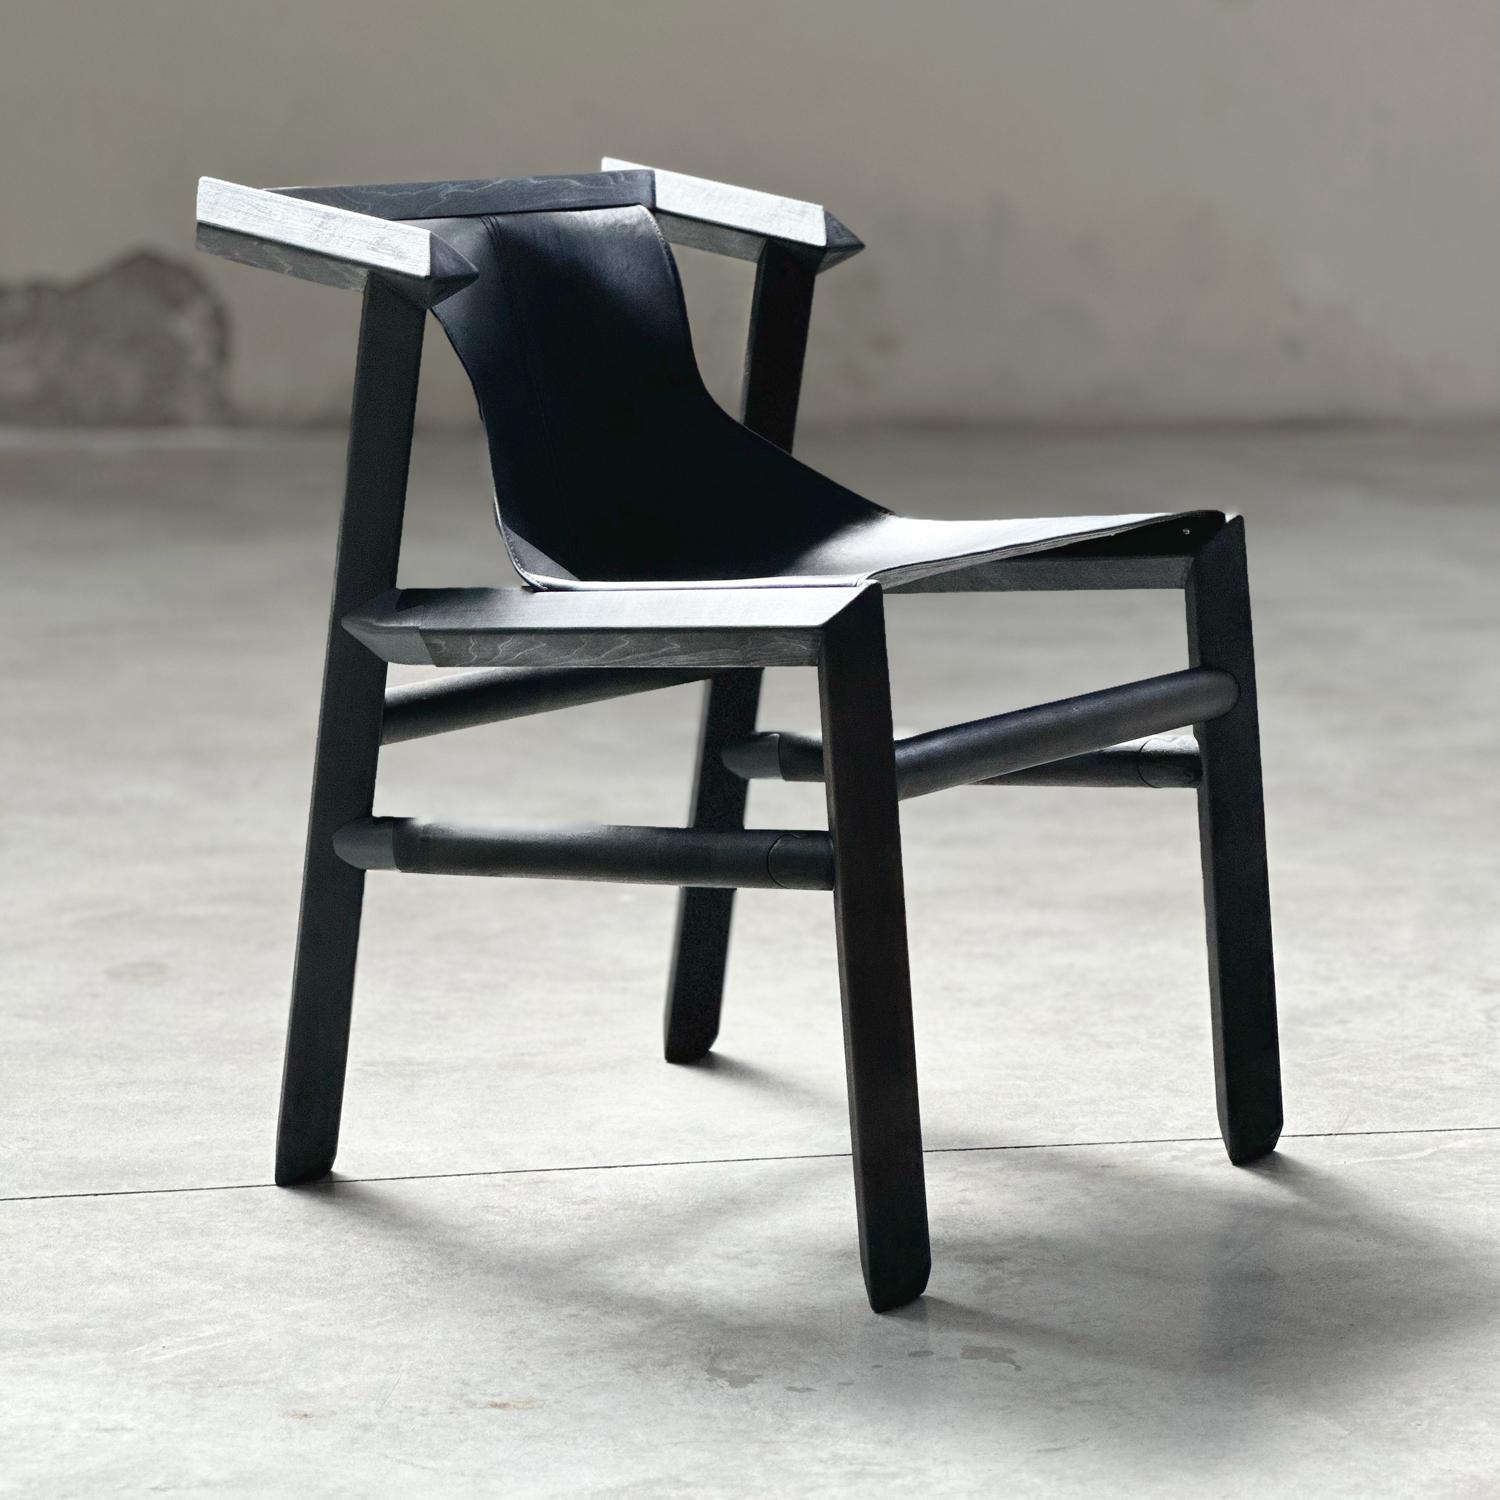 The chair model BLACK 1901 was launched at the ICFF - Wanted design fair in 2022, during the New York design week.
Each chair is made by his creator and his team at the espina corona workshop under SLOW MADE standards and with ecological